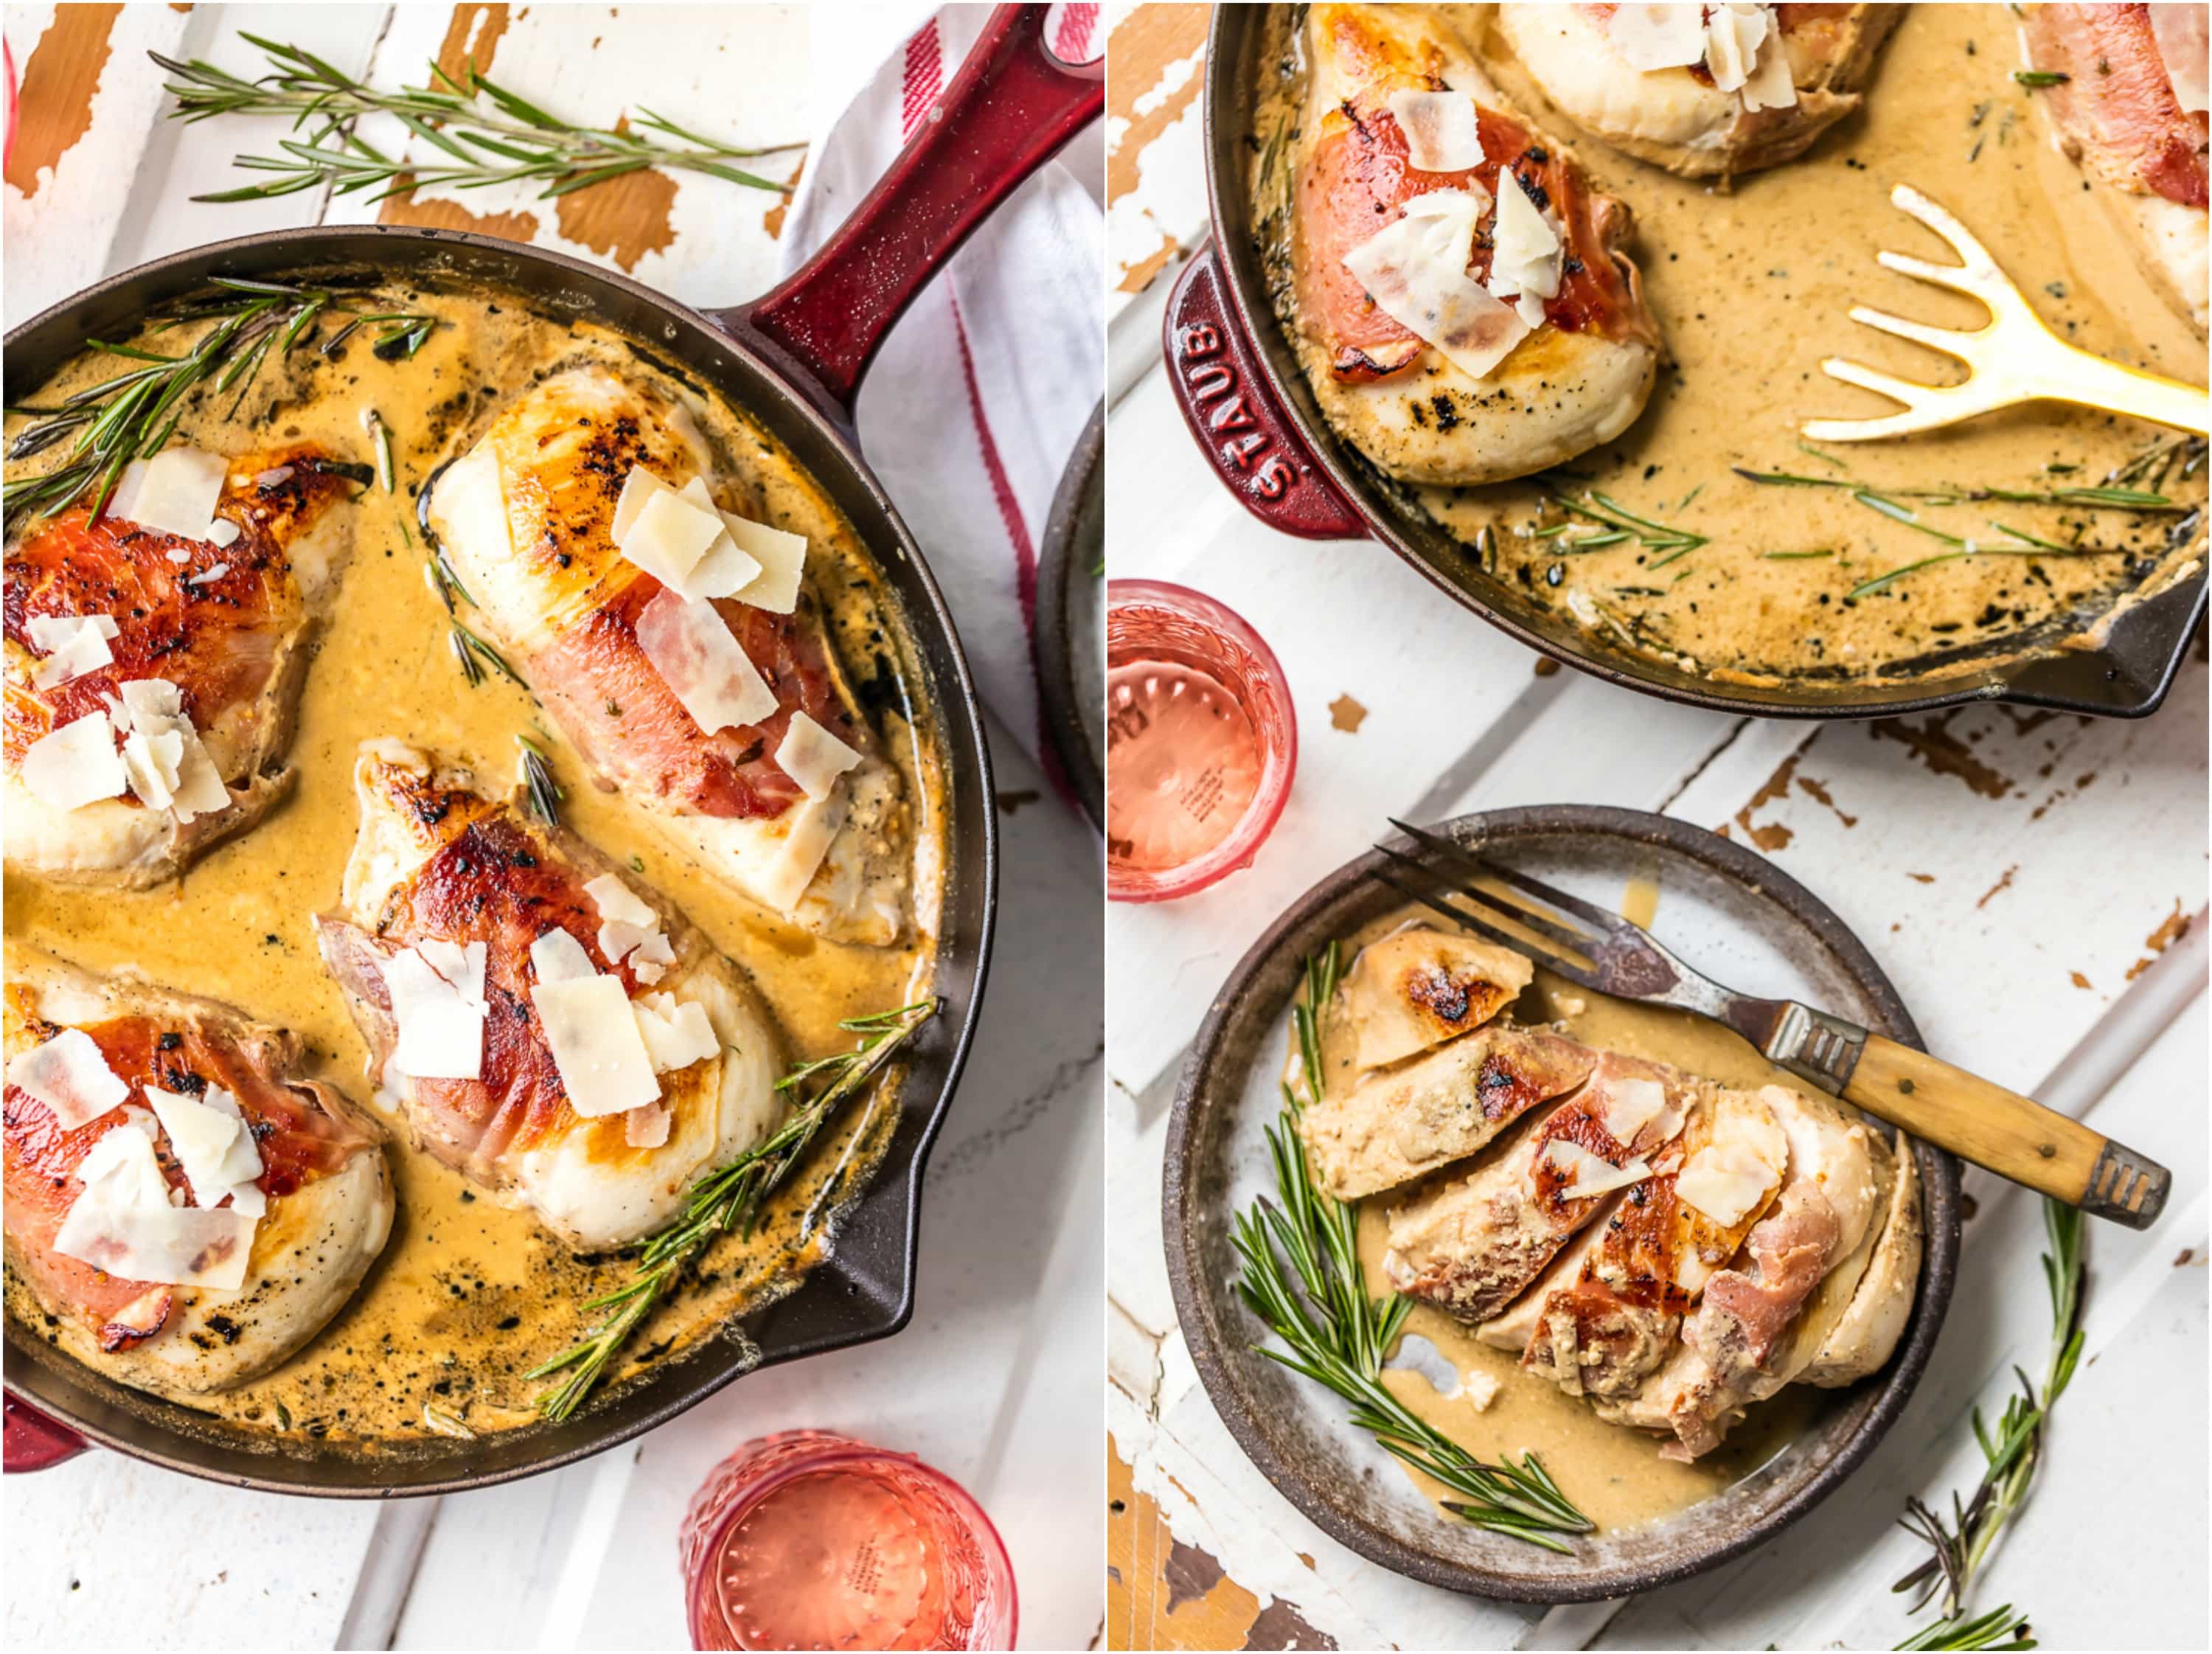 PROSCUITTO WRAPPED SHERRY CREAM CHICKEN SKILLET is our favorite EASY and quick dinner! So much flavor and made in under 30 minutes! The cream sauce...I can't get enough!